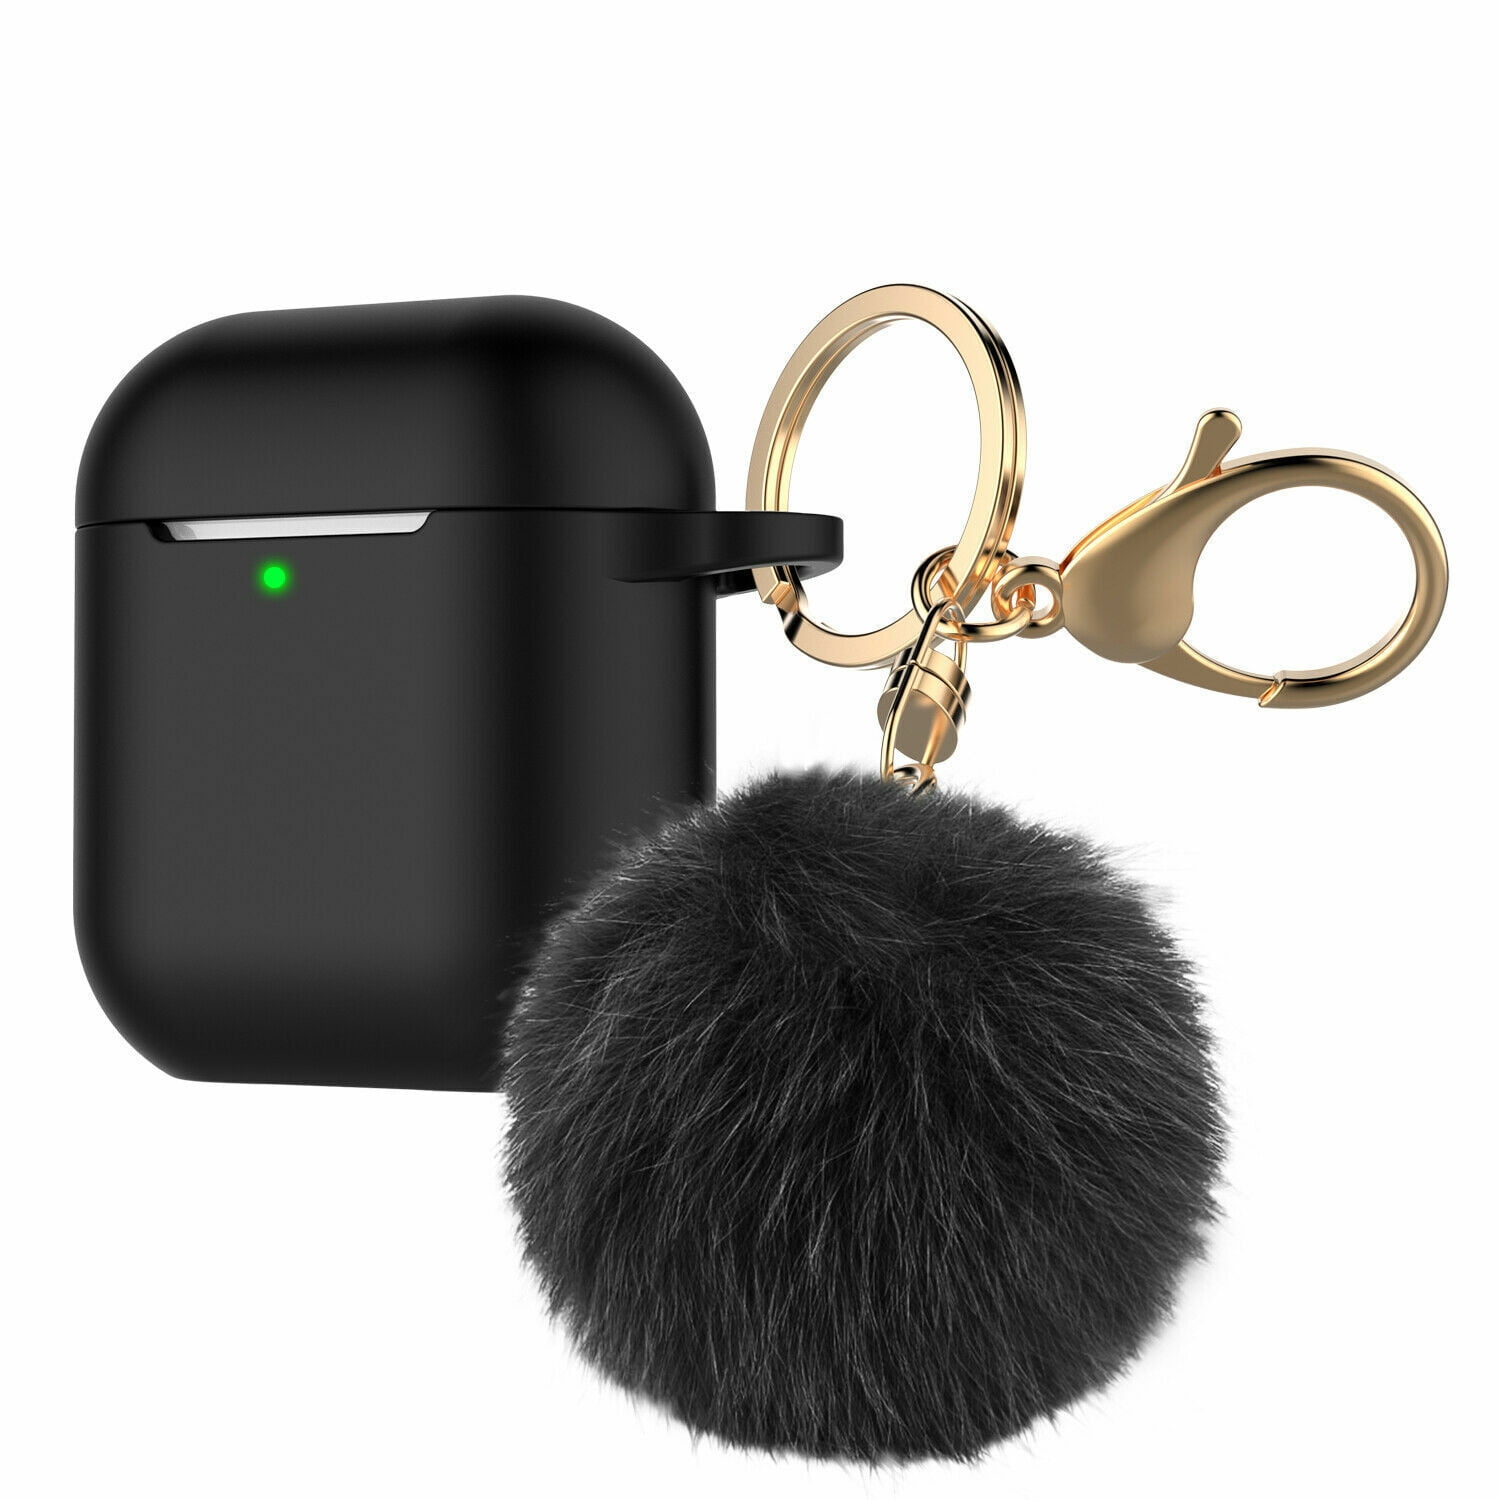  Filoto Case for Airpods, Airpod Case Cover for Apple Airpods  2&1 Charging Case, Cute Air Pods Silicone Protective Accessories Cases/Keychain/Pompom,  Best Gift for Girls and Women, Black : Electronics